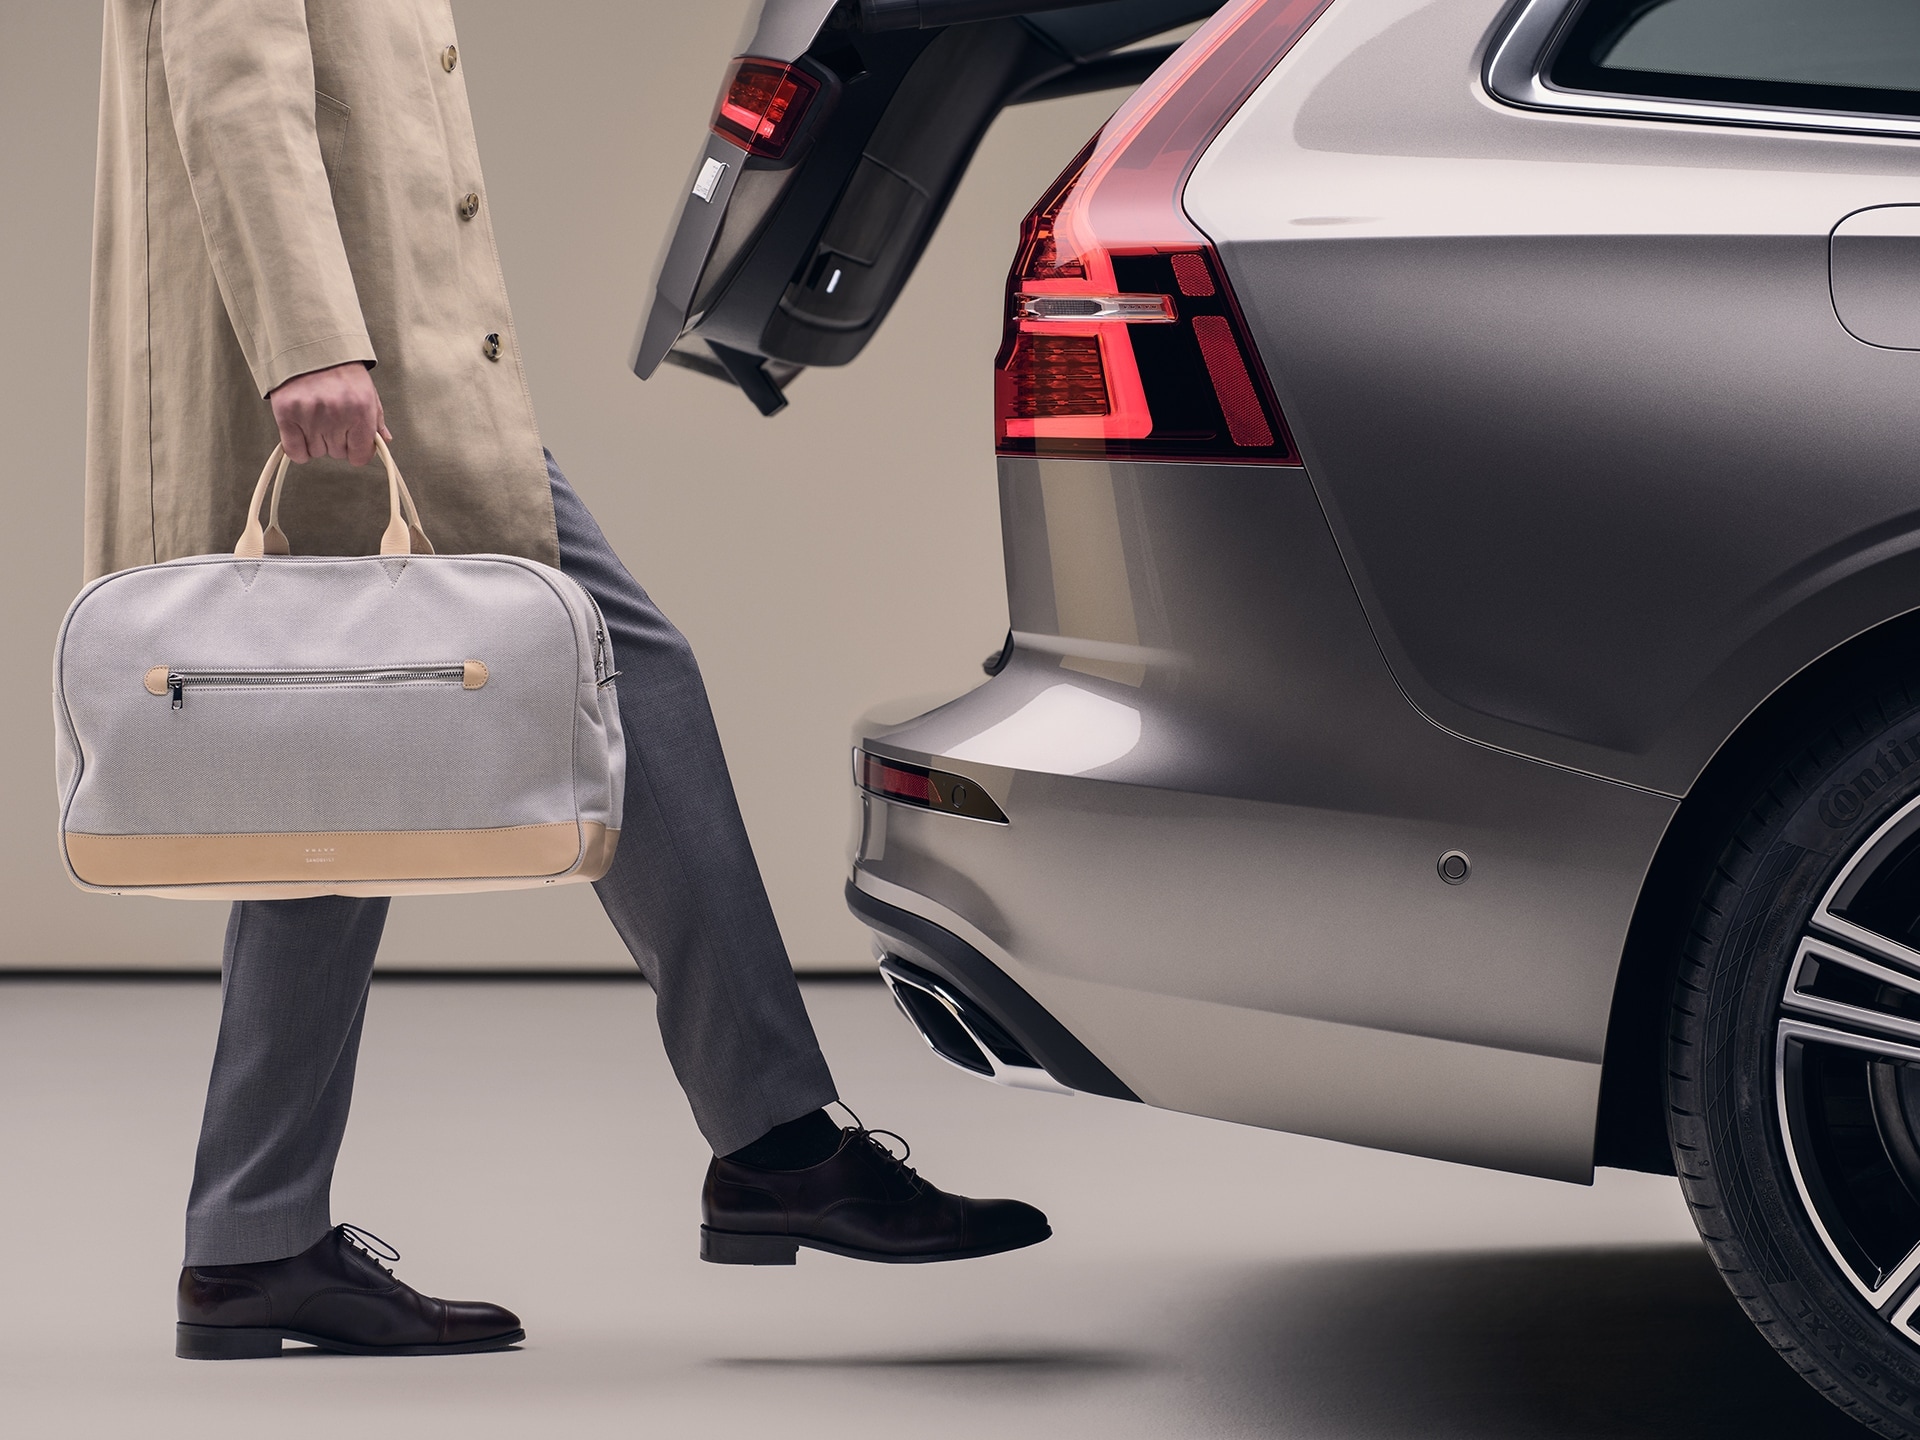 A man with a sports bag in his hand moves his foot under the rear bumper to open the hands-free tailgate.